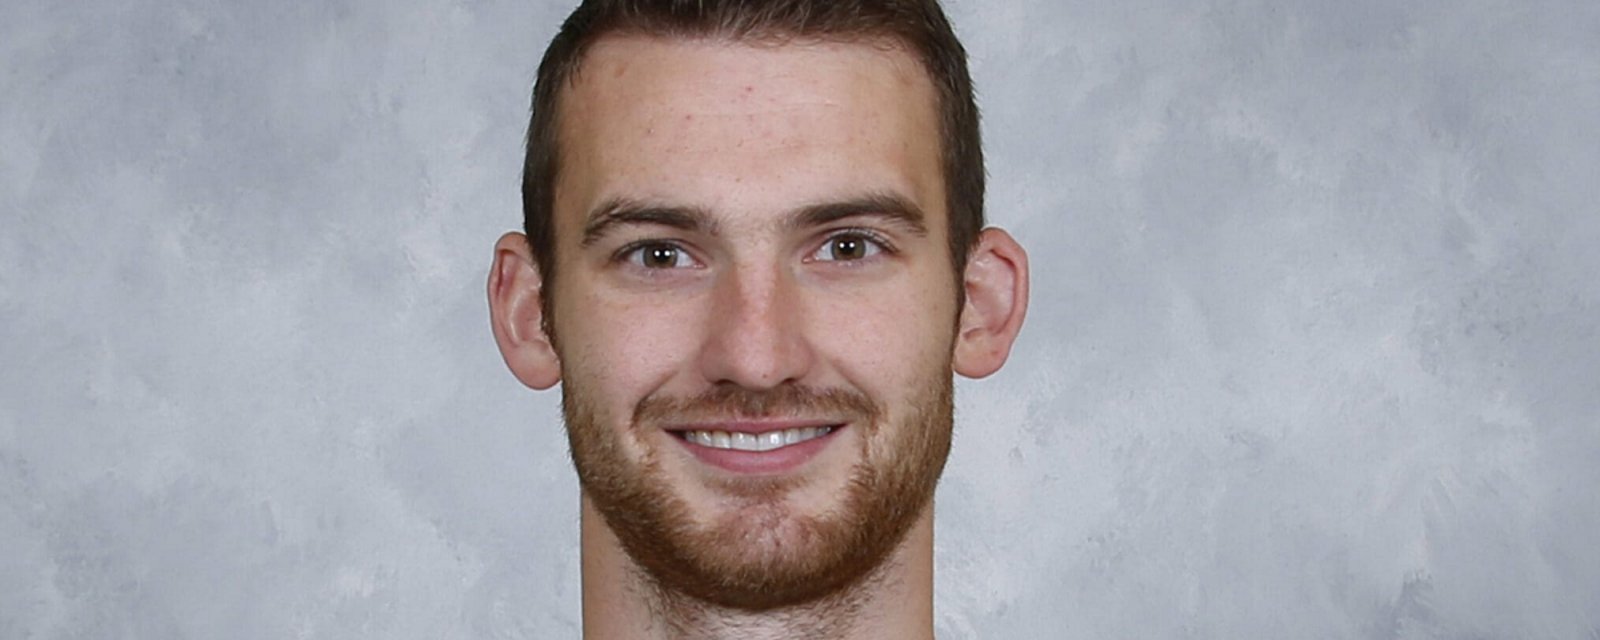 2 more NHL players opt for neck guards in wake of Adam Johnson tragedy,